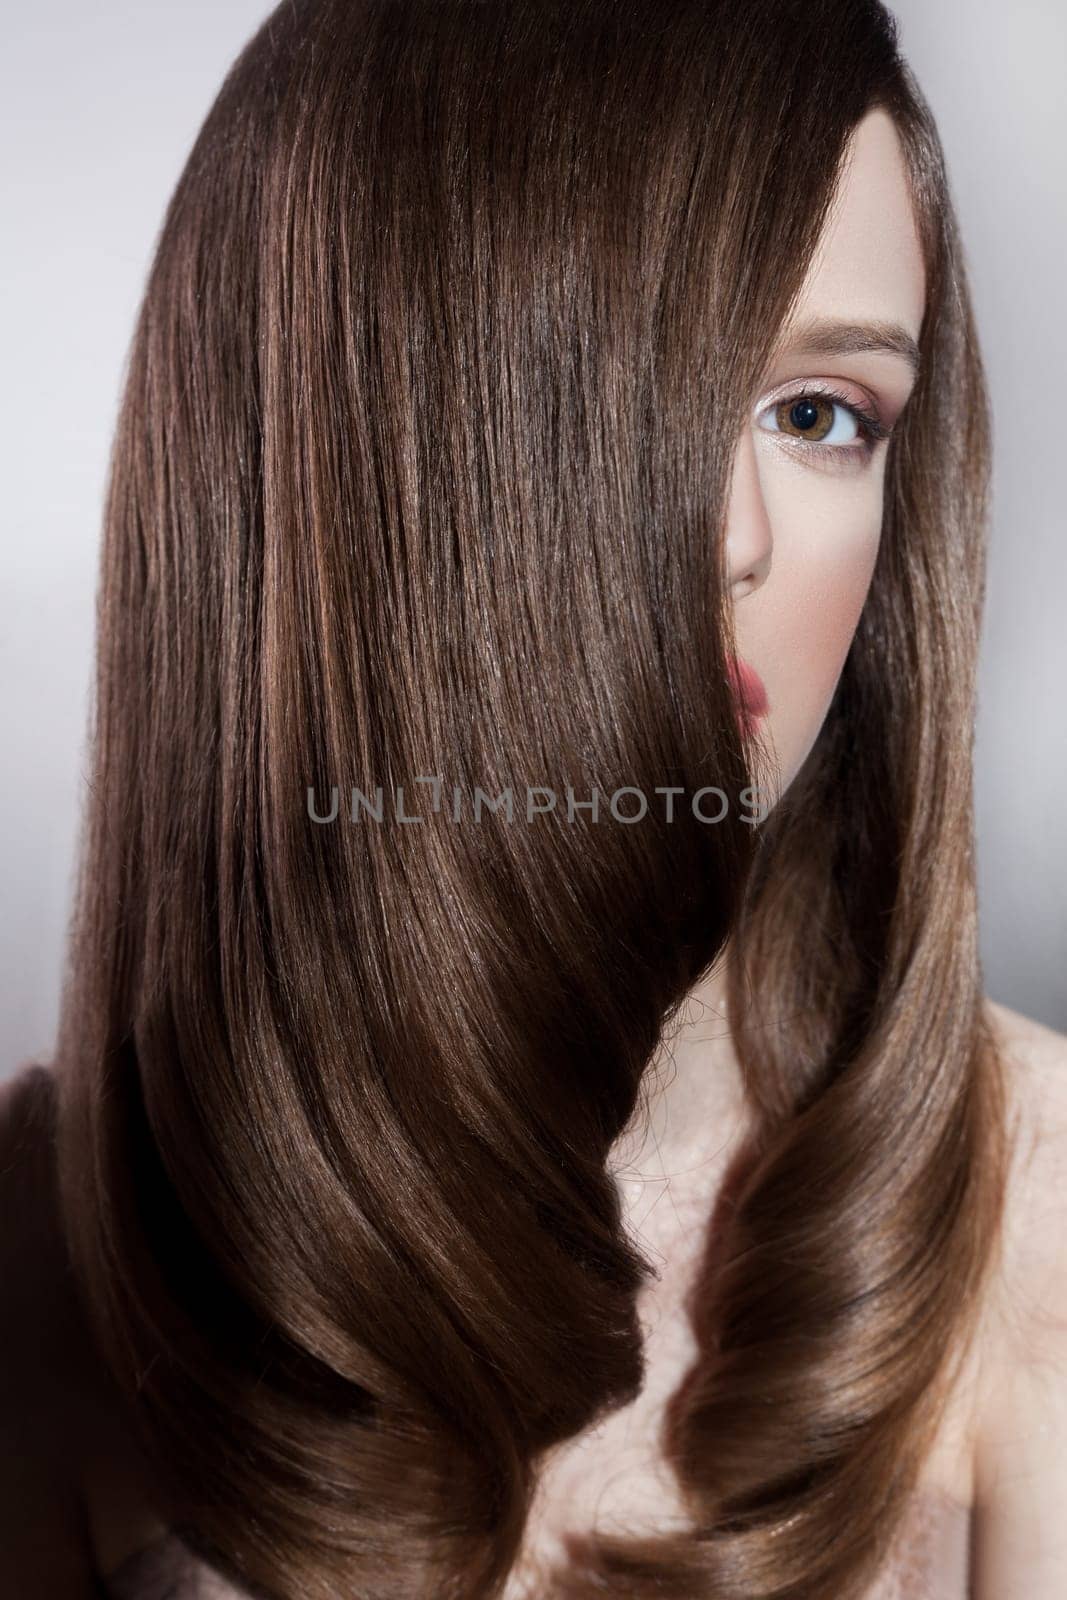 Portrait of attractive brunette woman fashion model with silk straight shiny hair and makeup, covering half of face with hair, looking at camera. Indoor studio shot isolated on gray background.